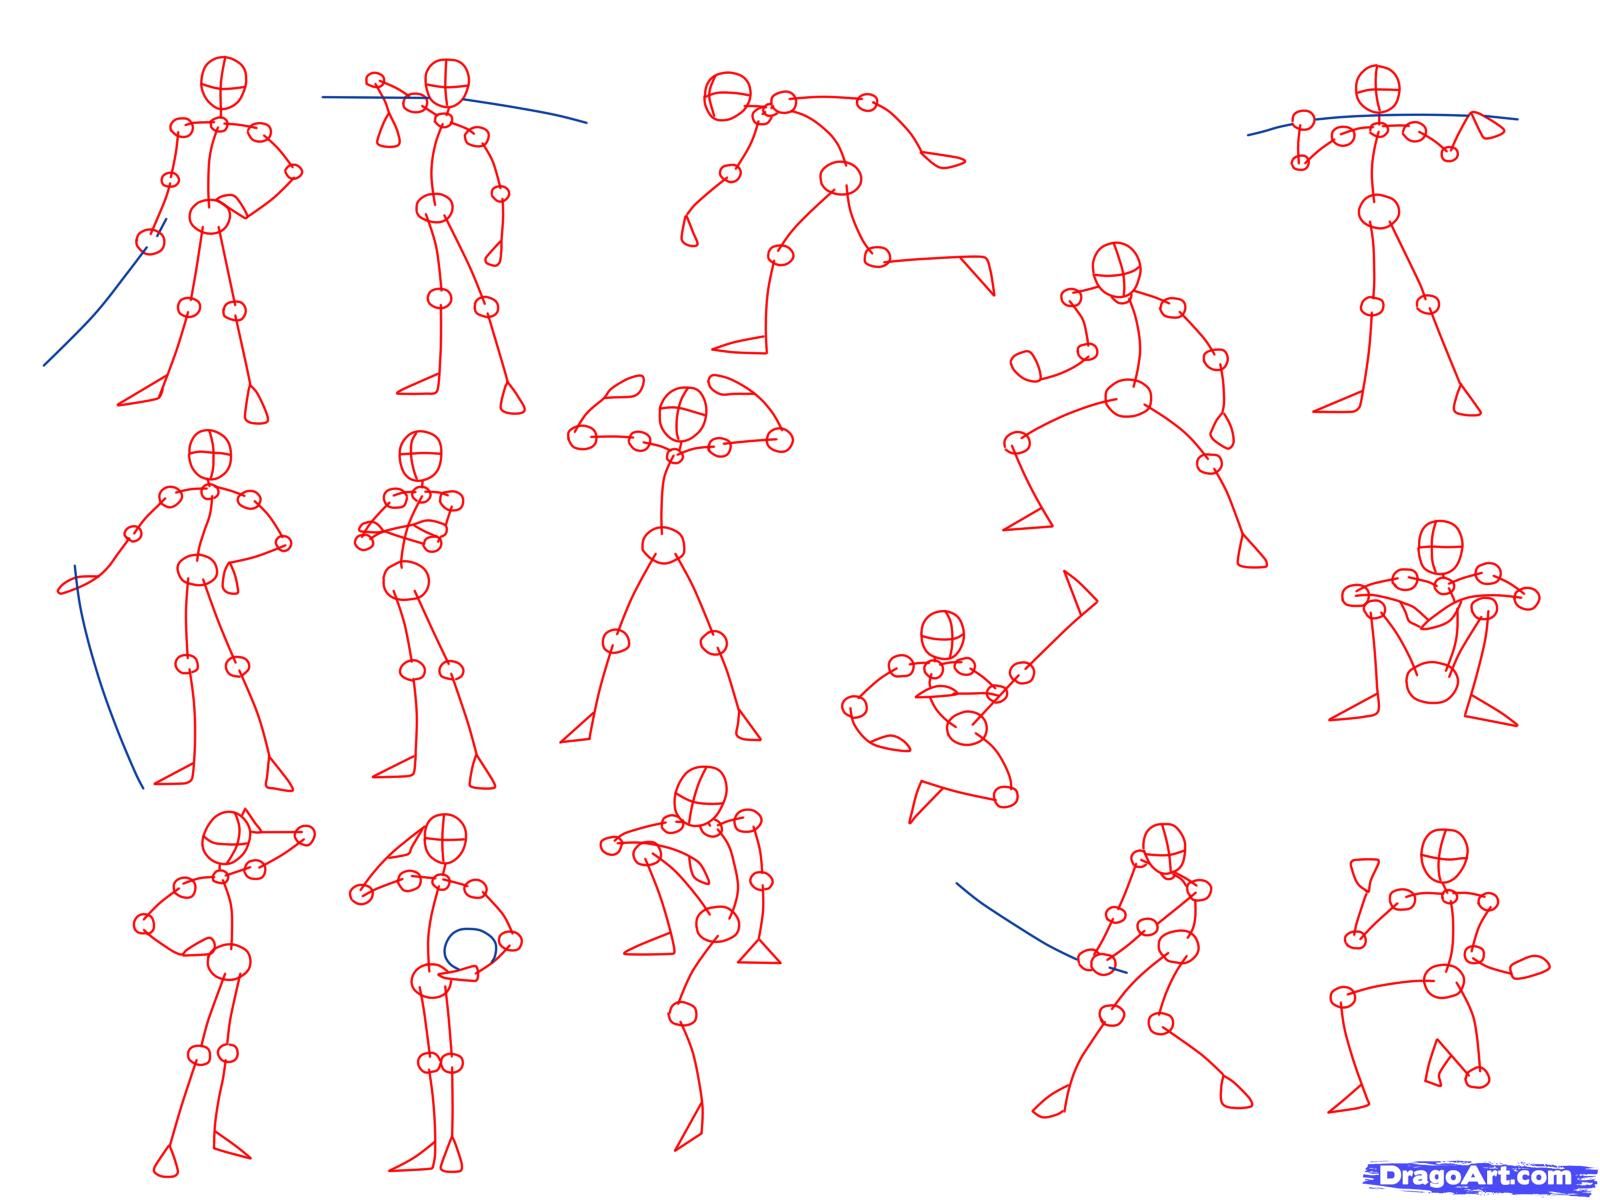 How to Draw Anime Poses Step by Step  AnimeOutline